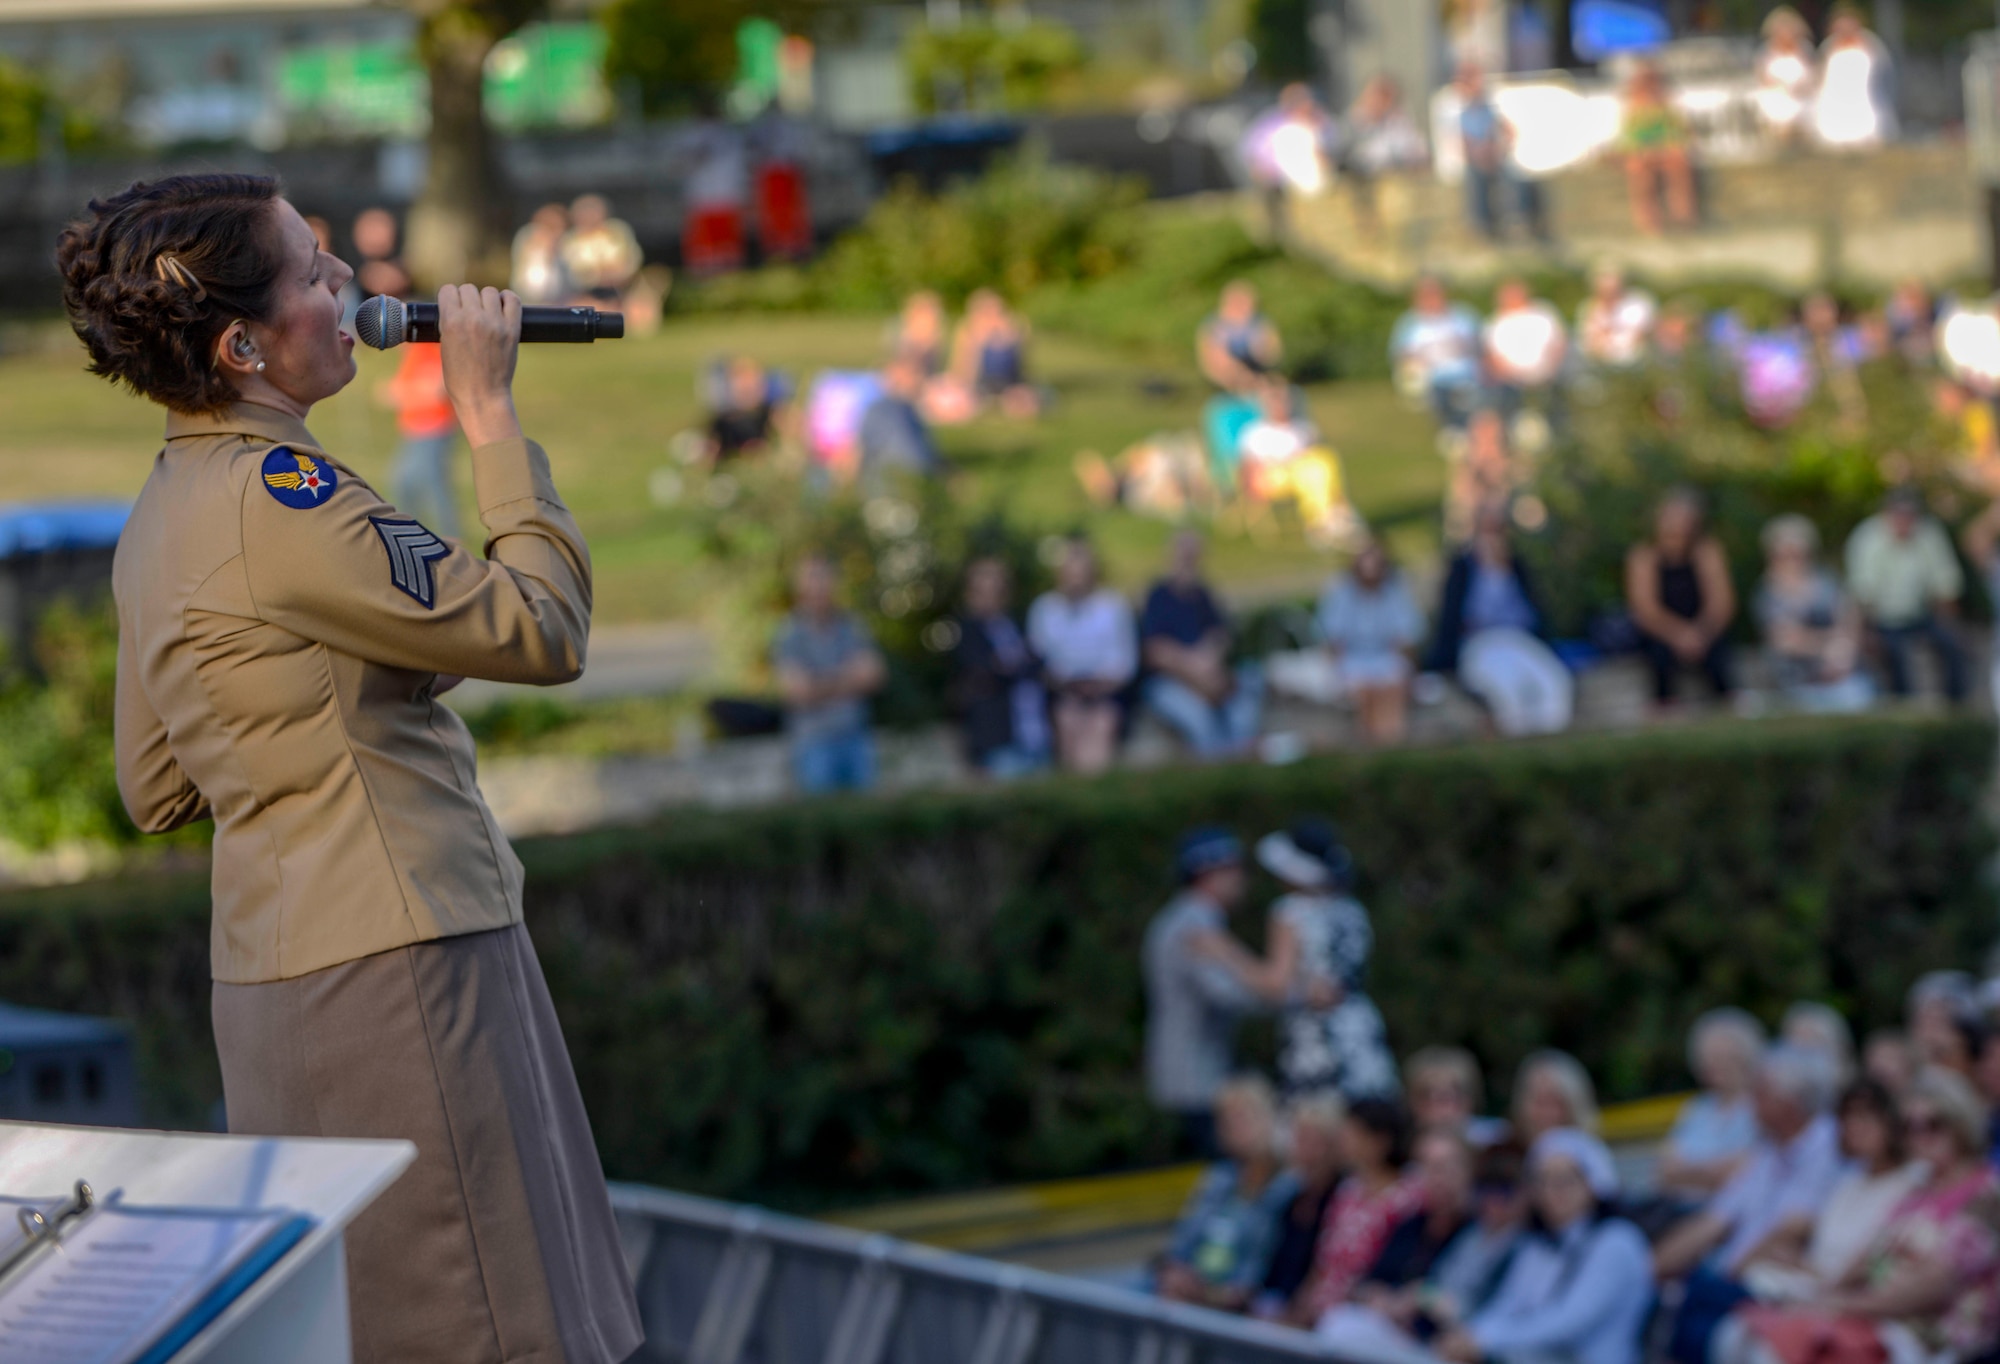 U.S. Air Force Staff Sgt. Joanne Griffin, U.S. Air Forces in Europe Band, sings during a Berlin Airlift 70th Anniversary commemoration in Berlin, Germany, Sept. 4, 2018. The USAFE Band performed together with Till Brönner, famous German jazz trumpeter, to not only commemorate the Berlin Airlift but also the friendship and partnership between the U.S. and Germany. (U.S. Air Force photo by Staff Sgt. Timothy Moore)